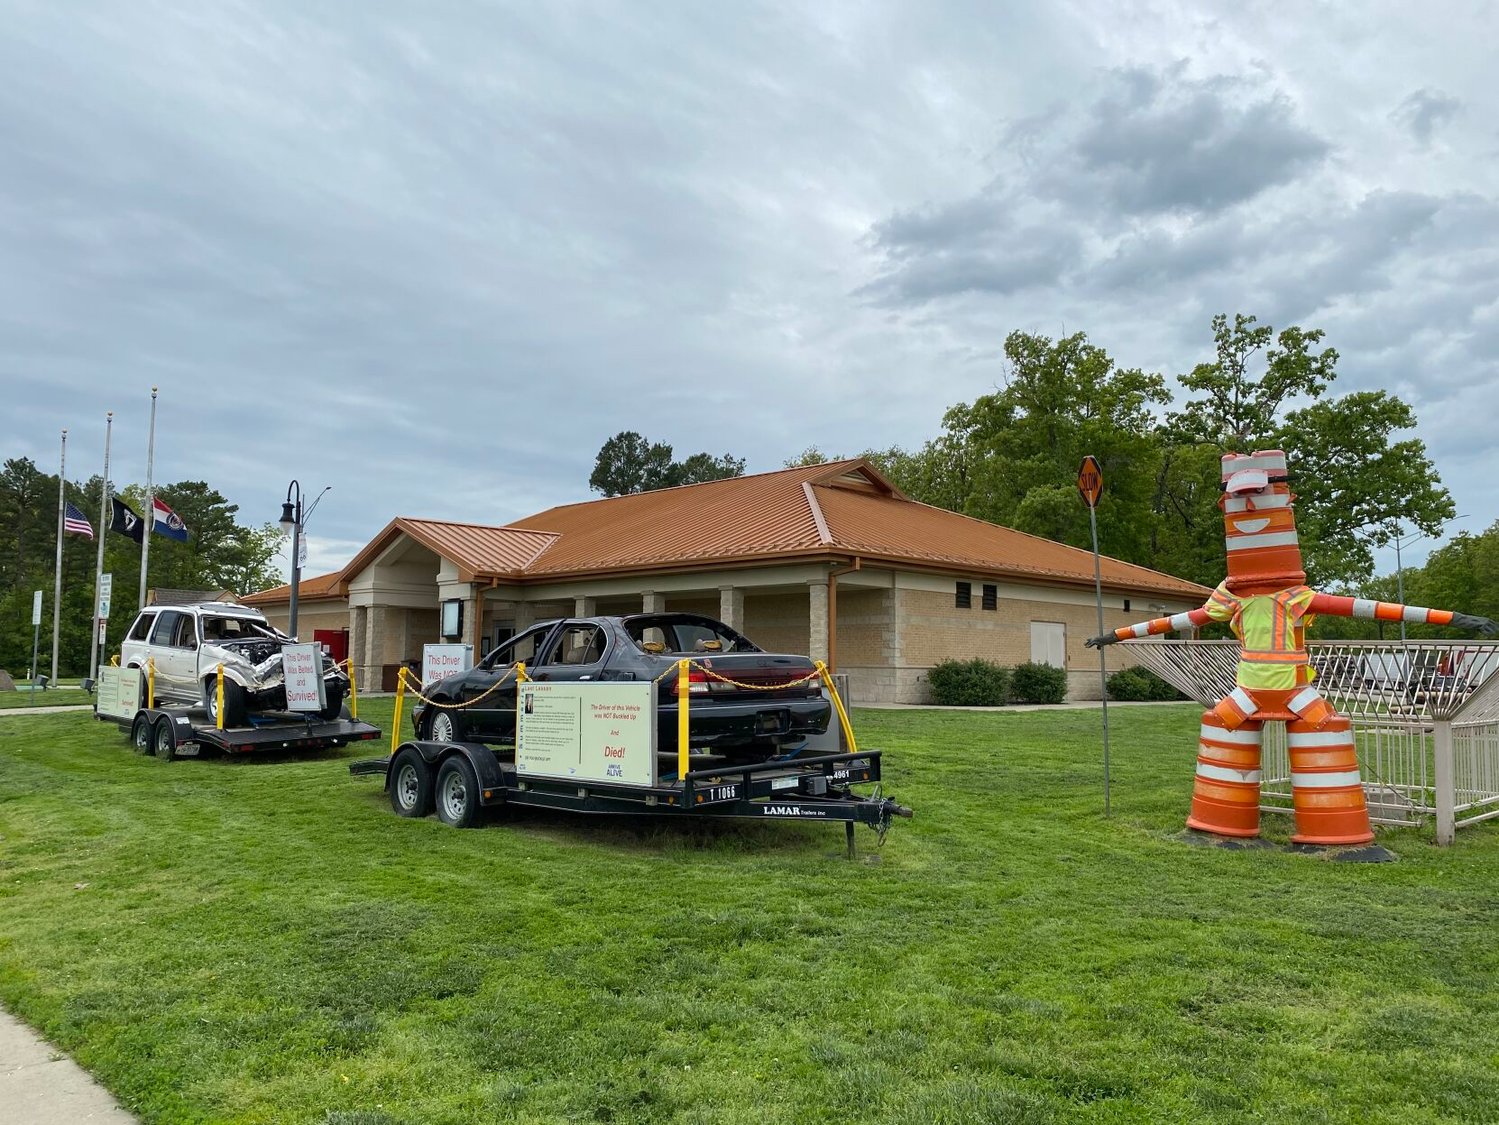 The Missouri Route 66 Welcome Center is located off I-44 traveling from Conway to Marshfield and currently features a display about the importance of buckling up from MoDOT. Ellison has worked at the rest area since 2019.